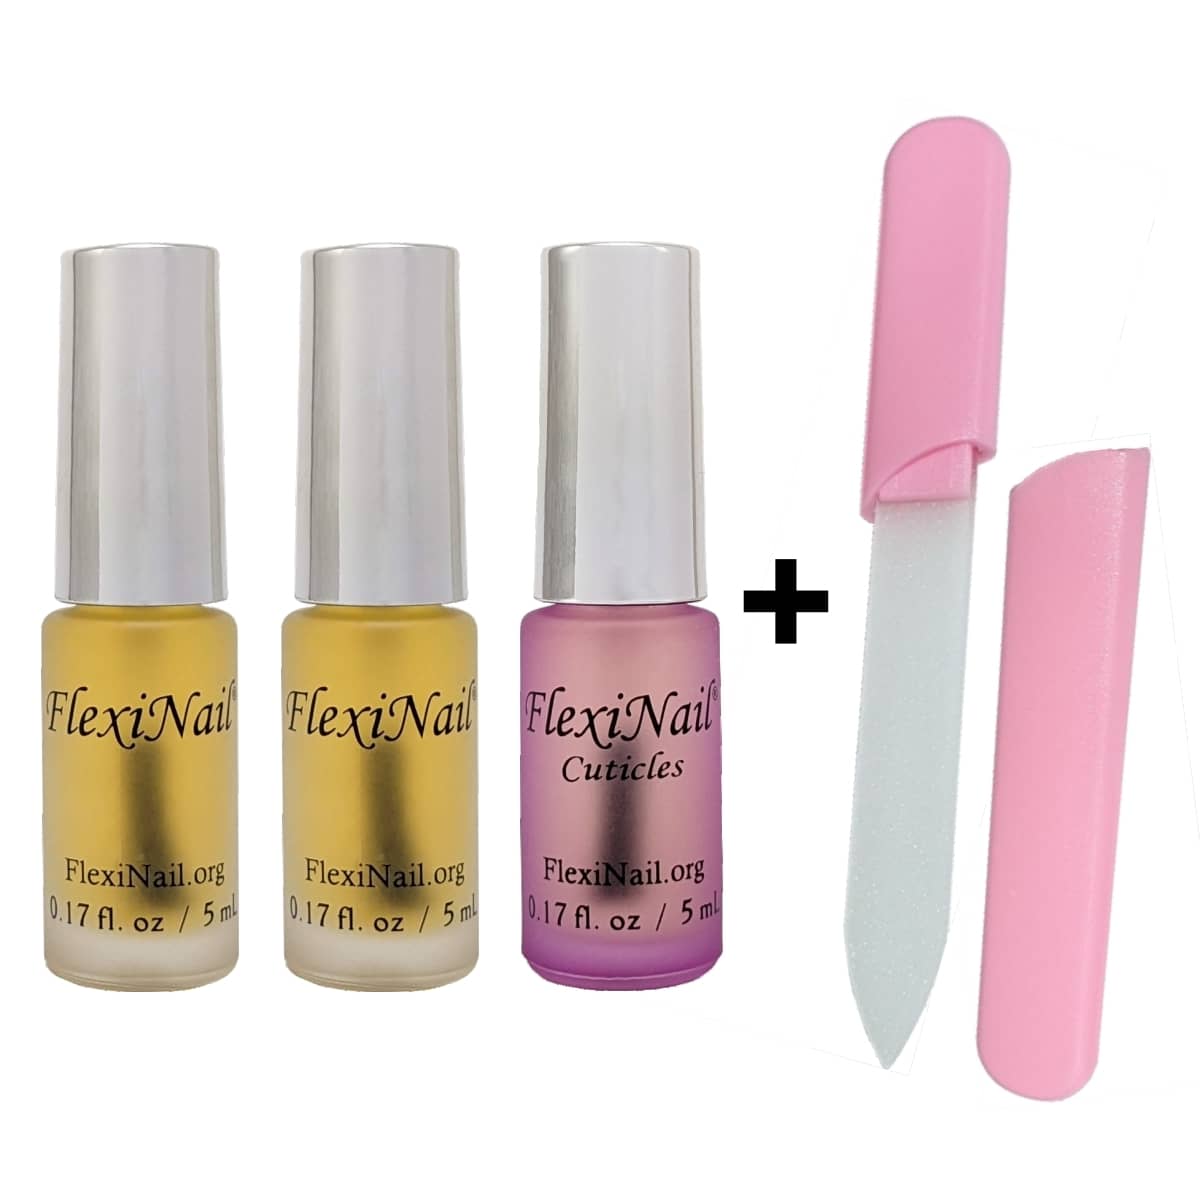 FlexiNail and FlexiNail for cuticles with a FREE glass nail file